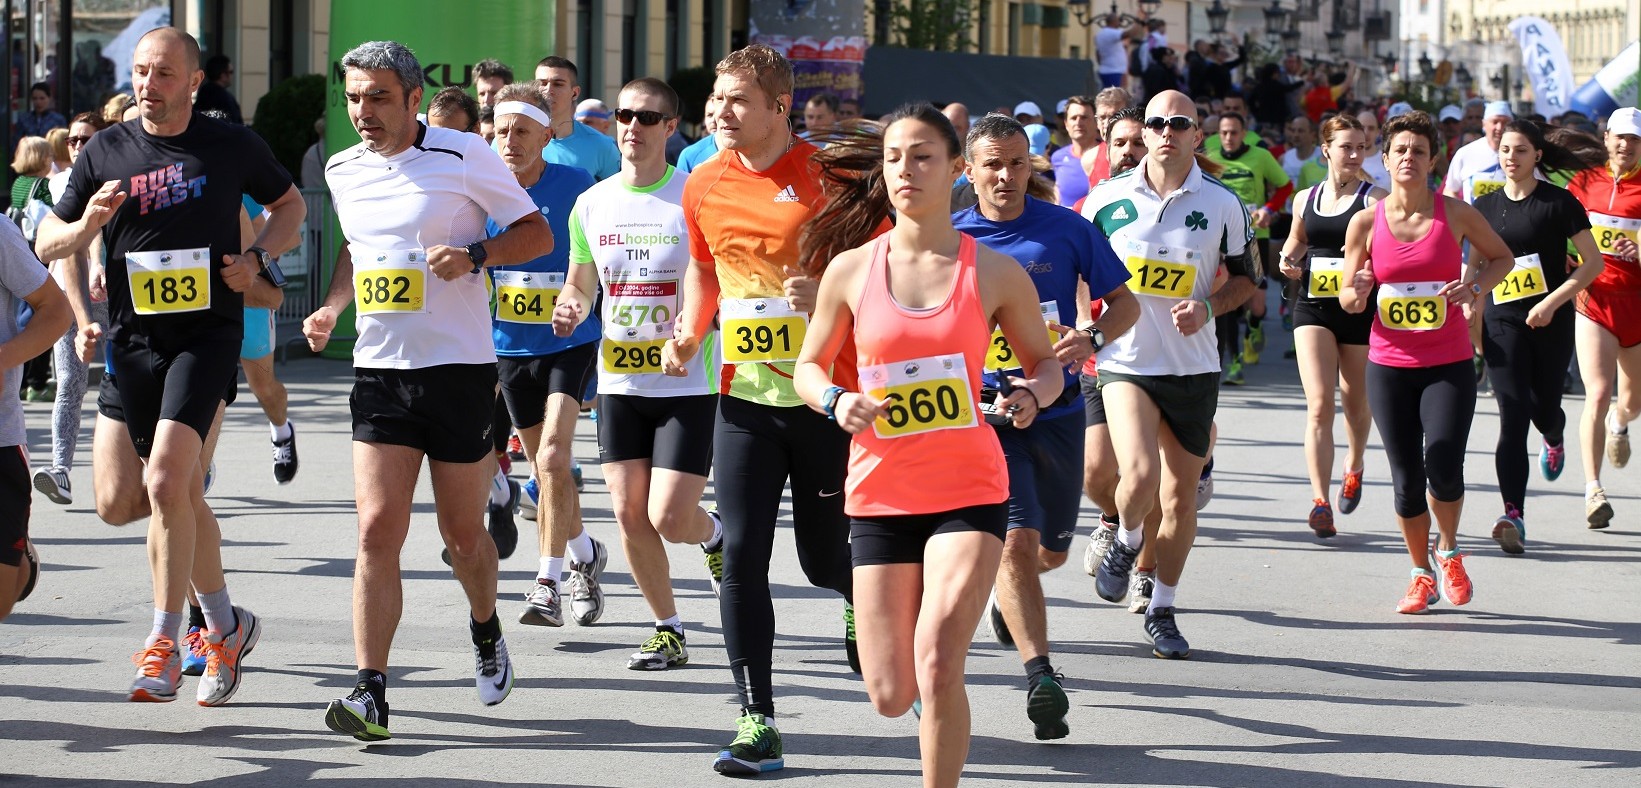 You don’t need to be a seasoned runner to put in a marathon effort